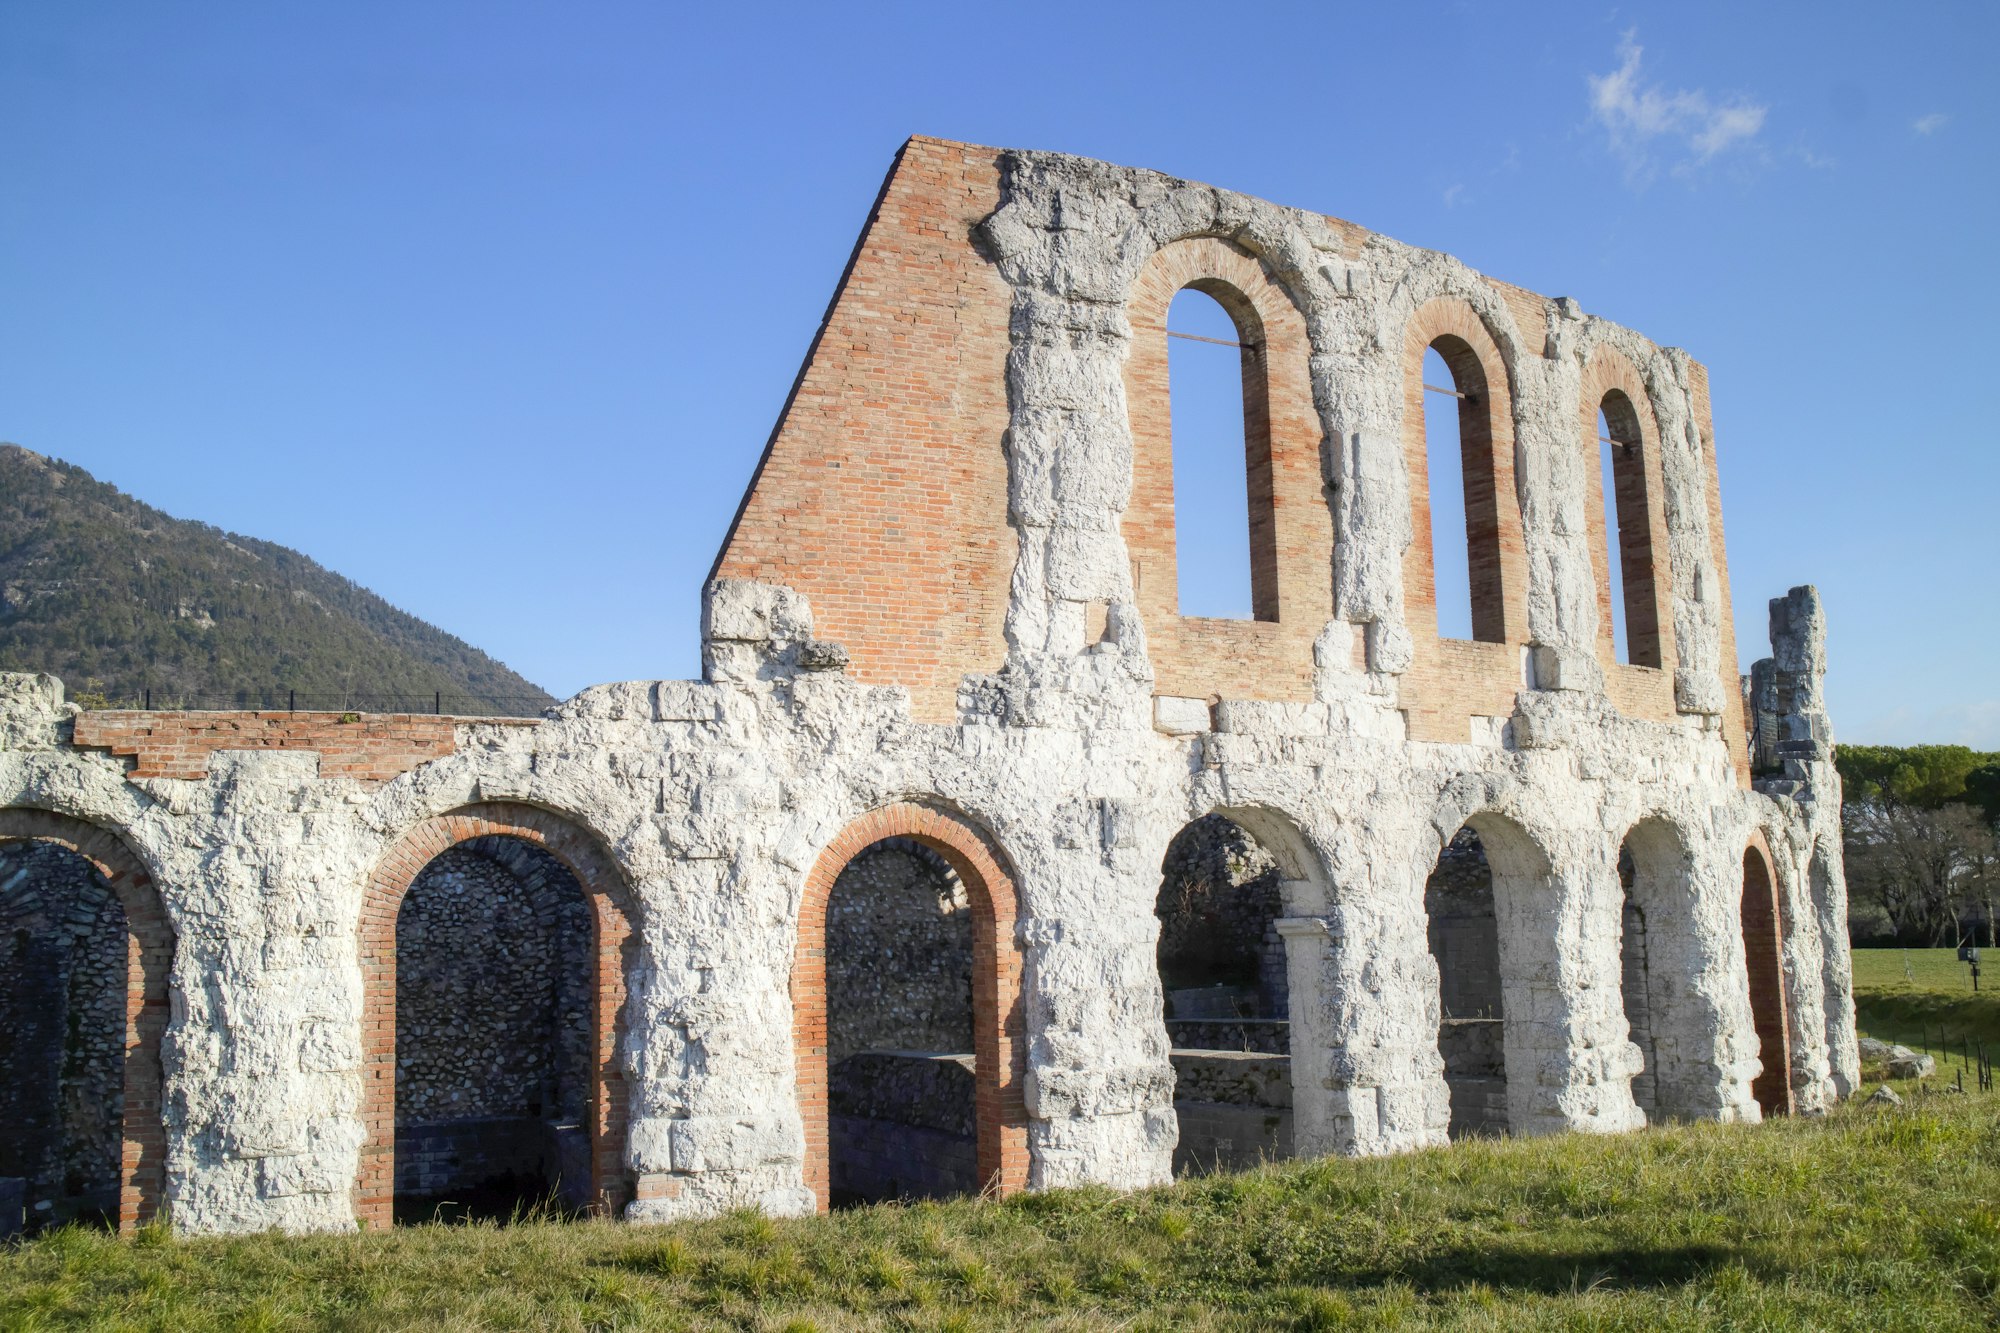 The remains of the Roman amphitheater in Gubbio Italy